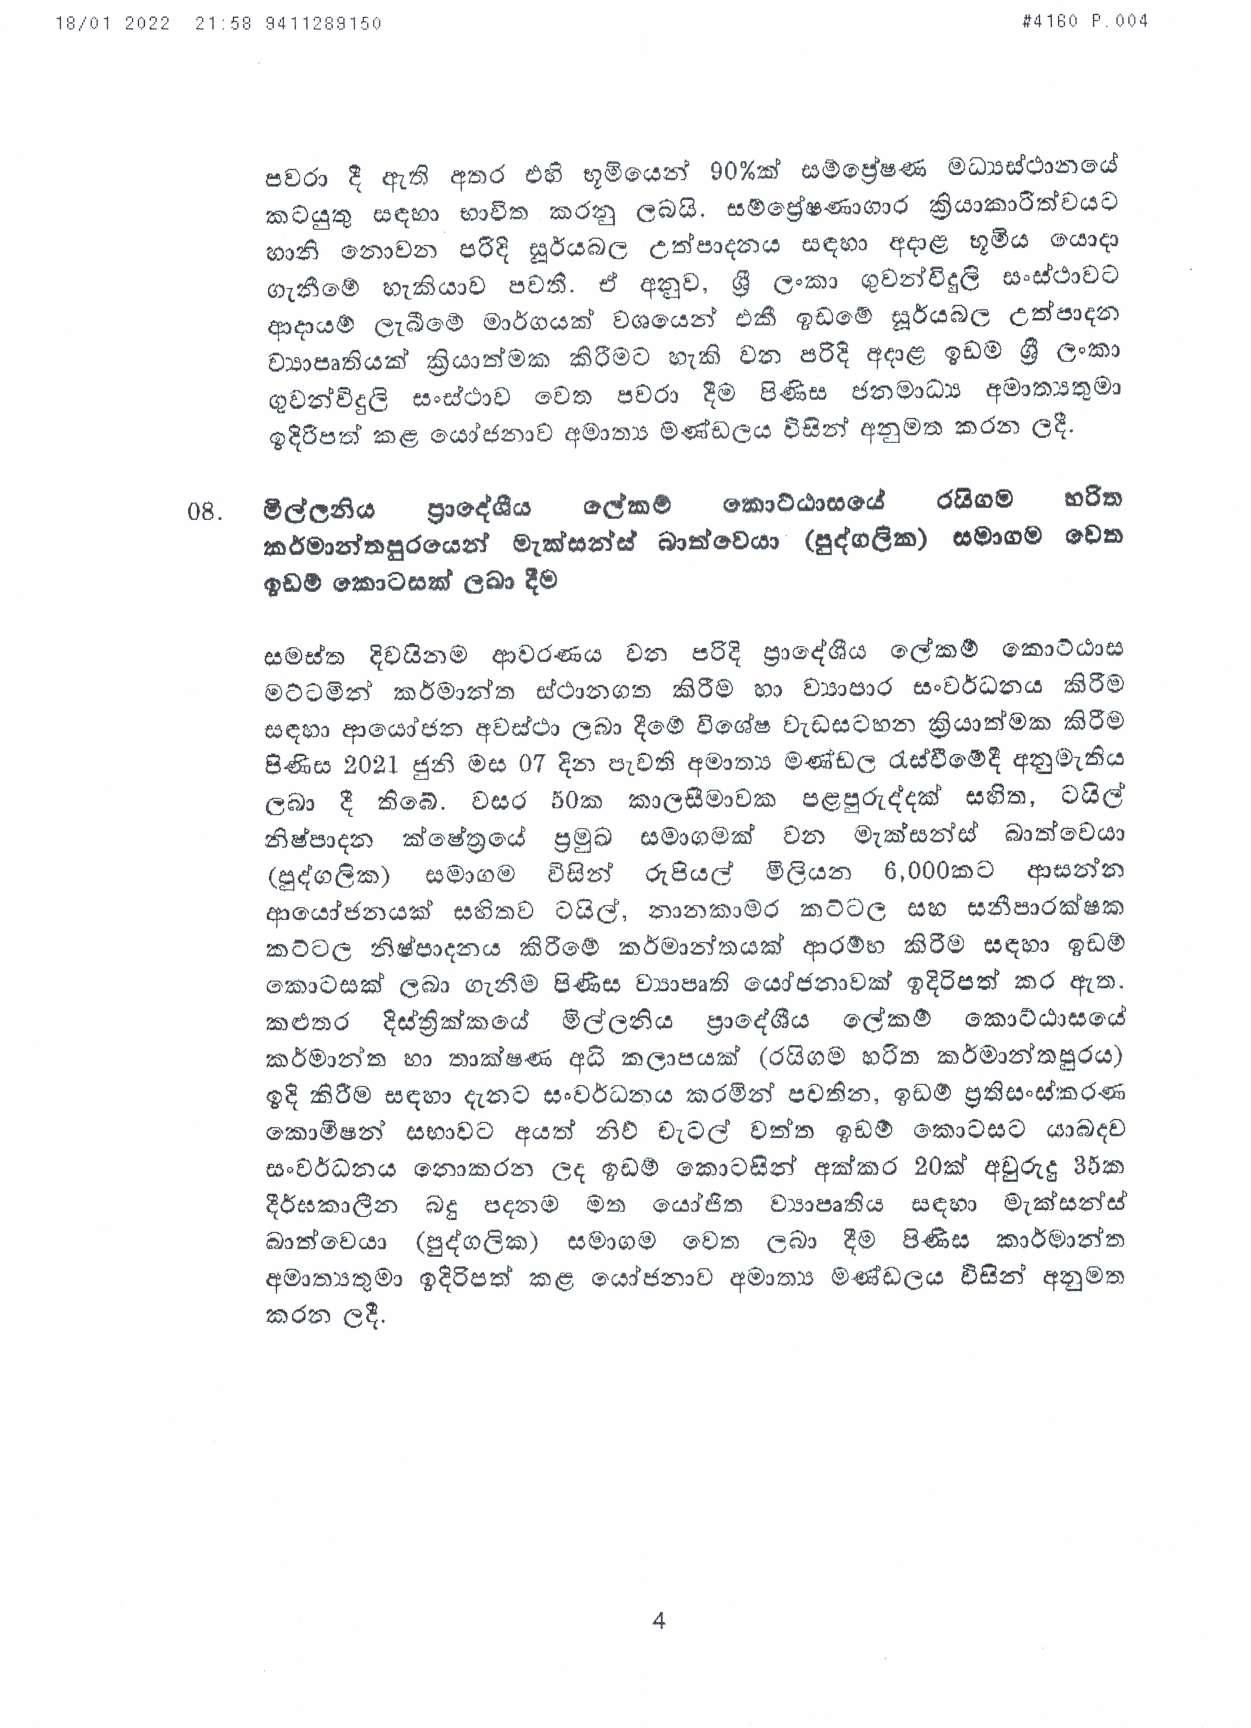 Cabinet Decision on 18.01.2022 page 004